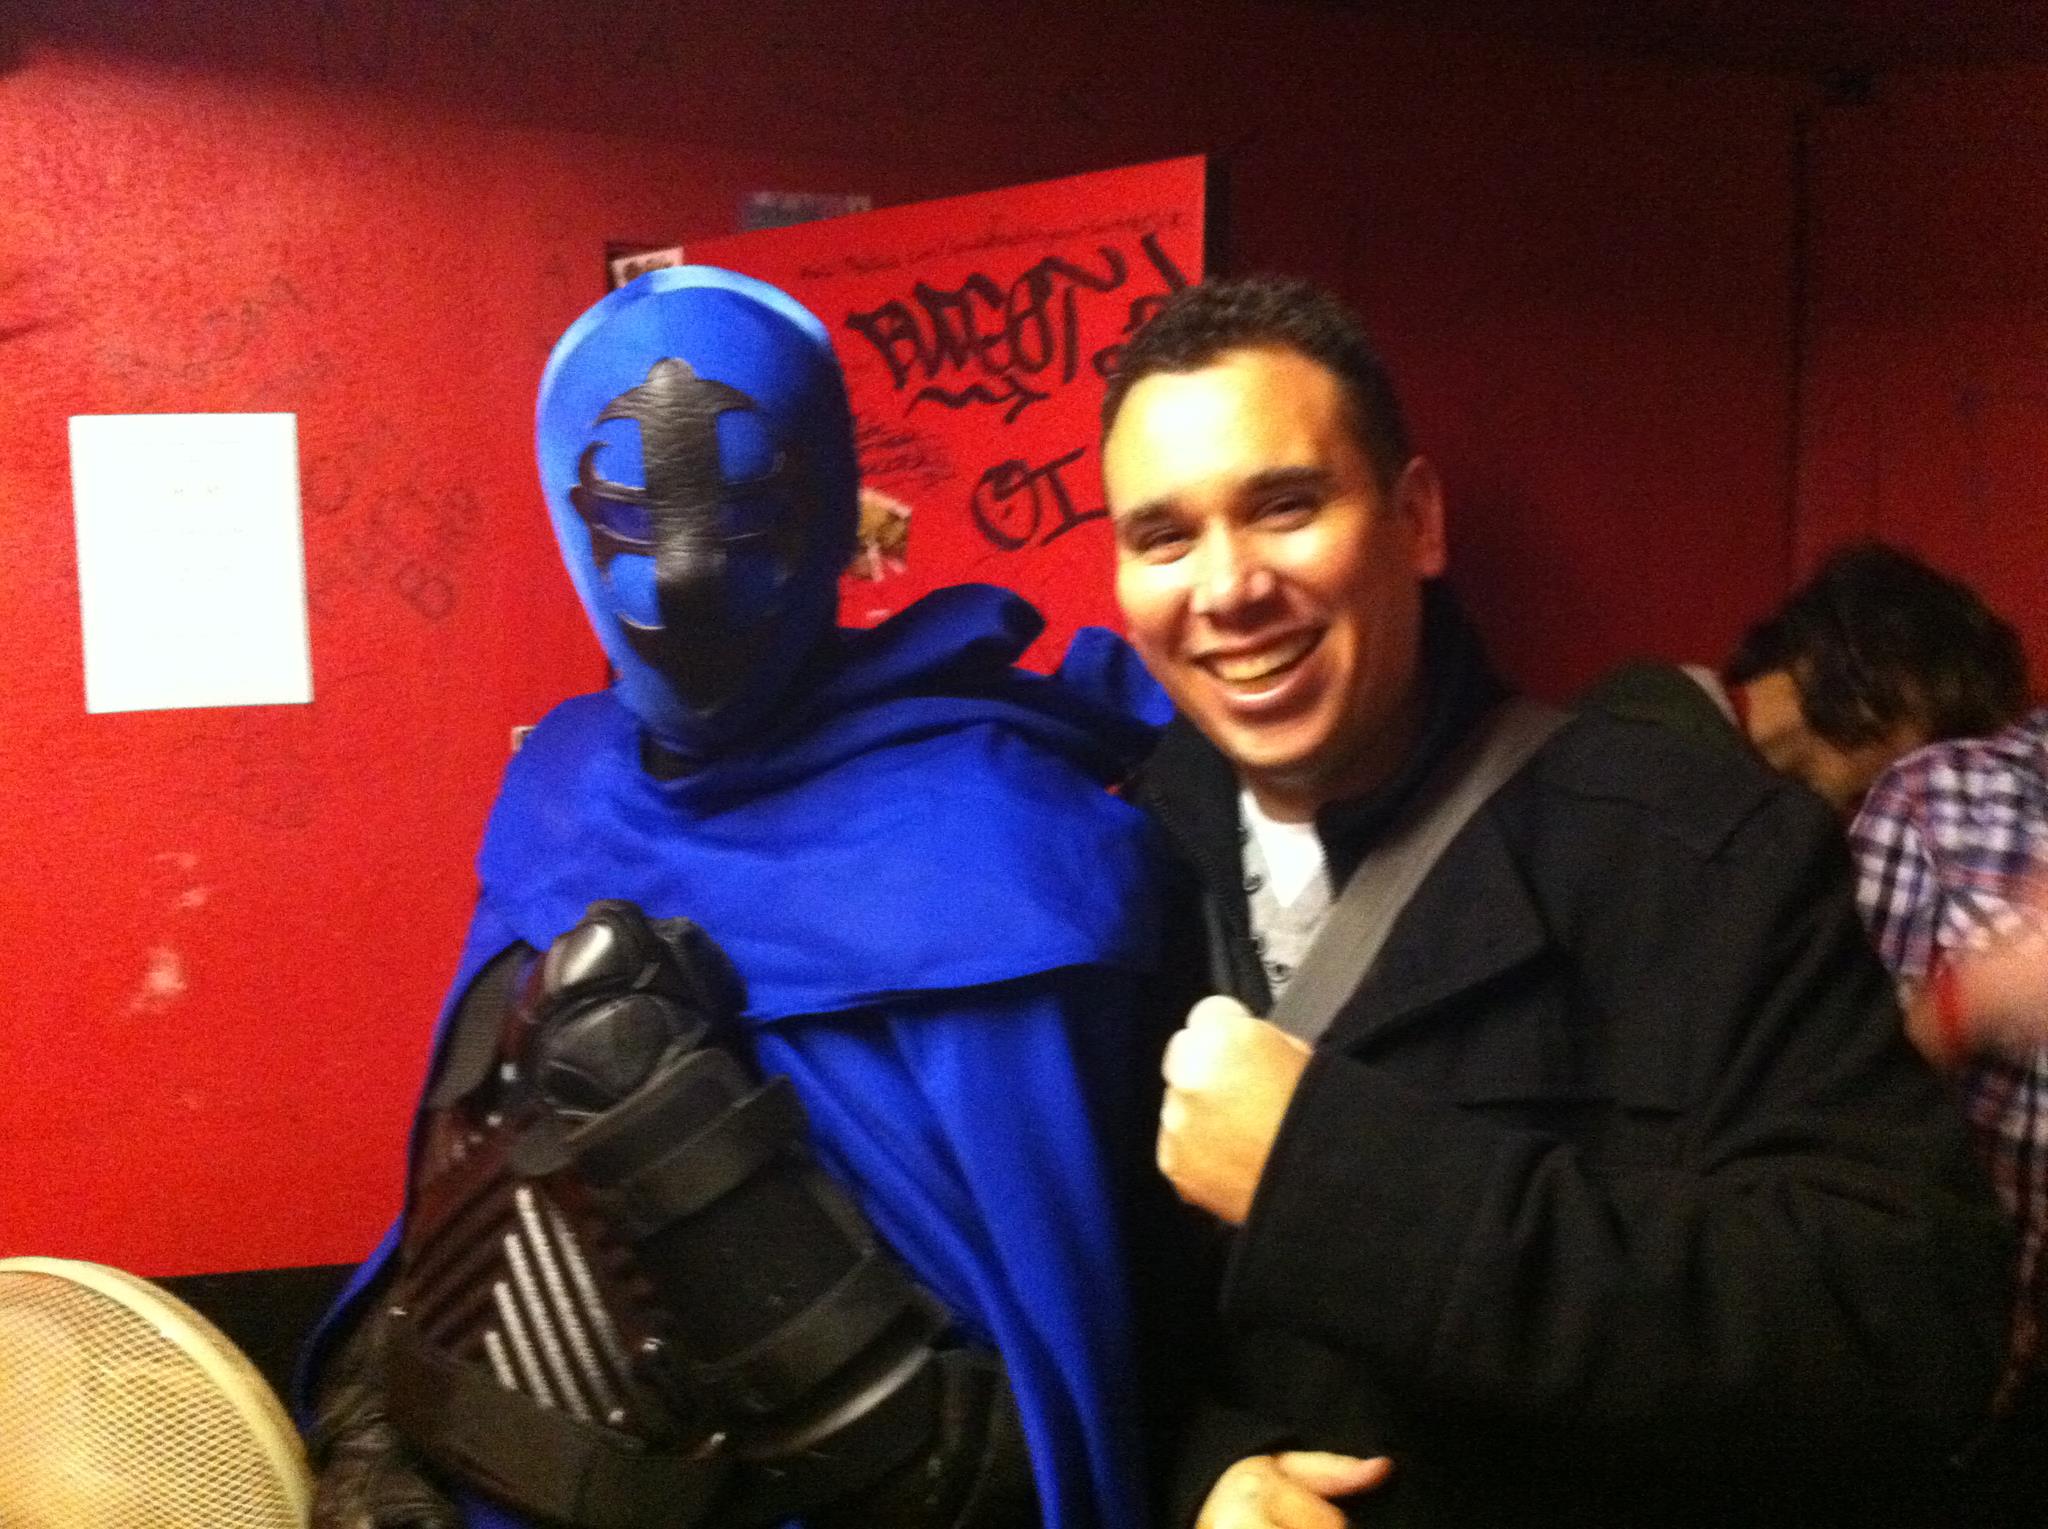 Salford Knight Warrior came down to one of my gigs - bizarre night!